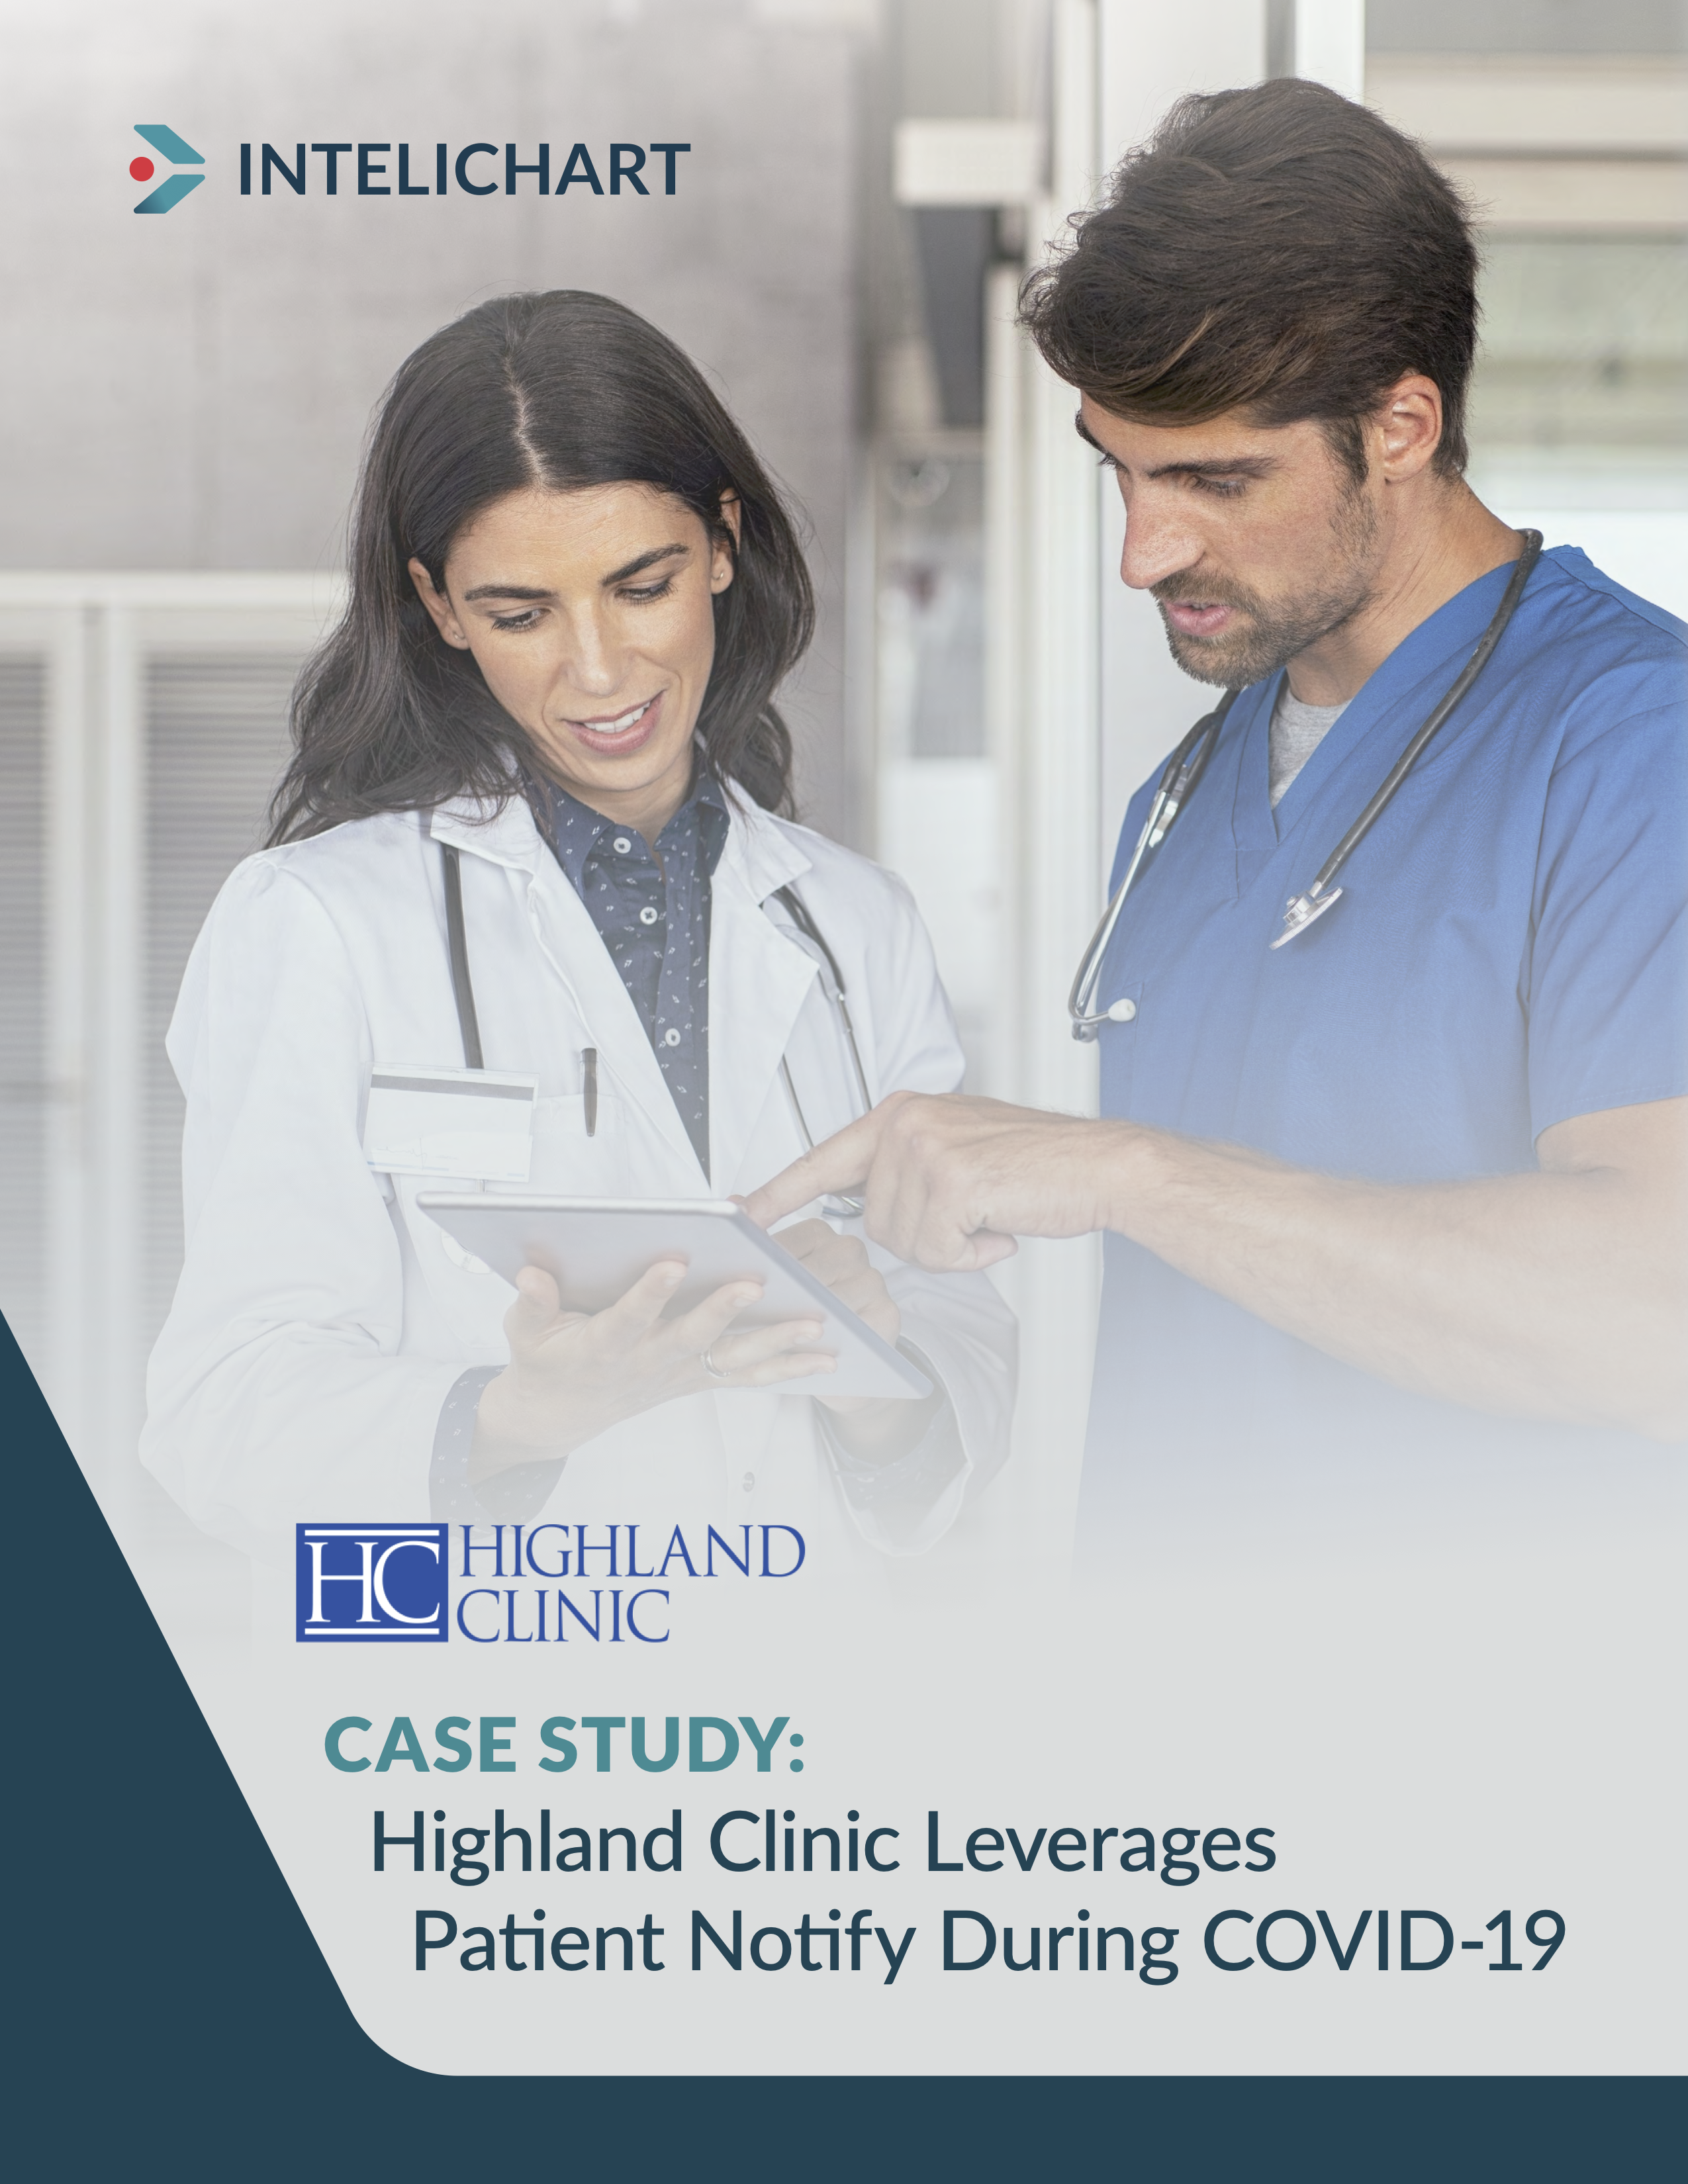 Highland Clinic Leverages Patient Notify During COVID-19